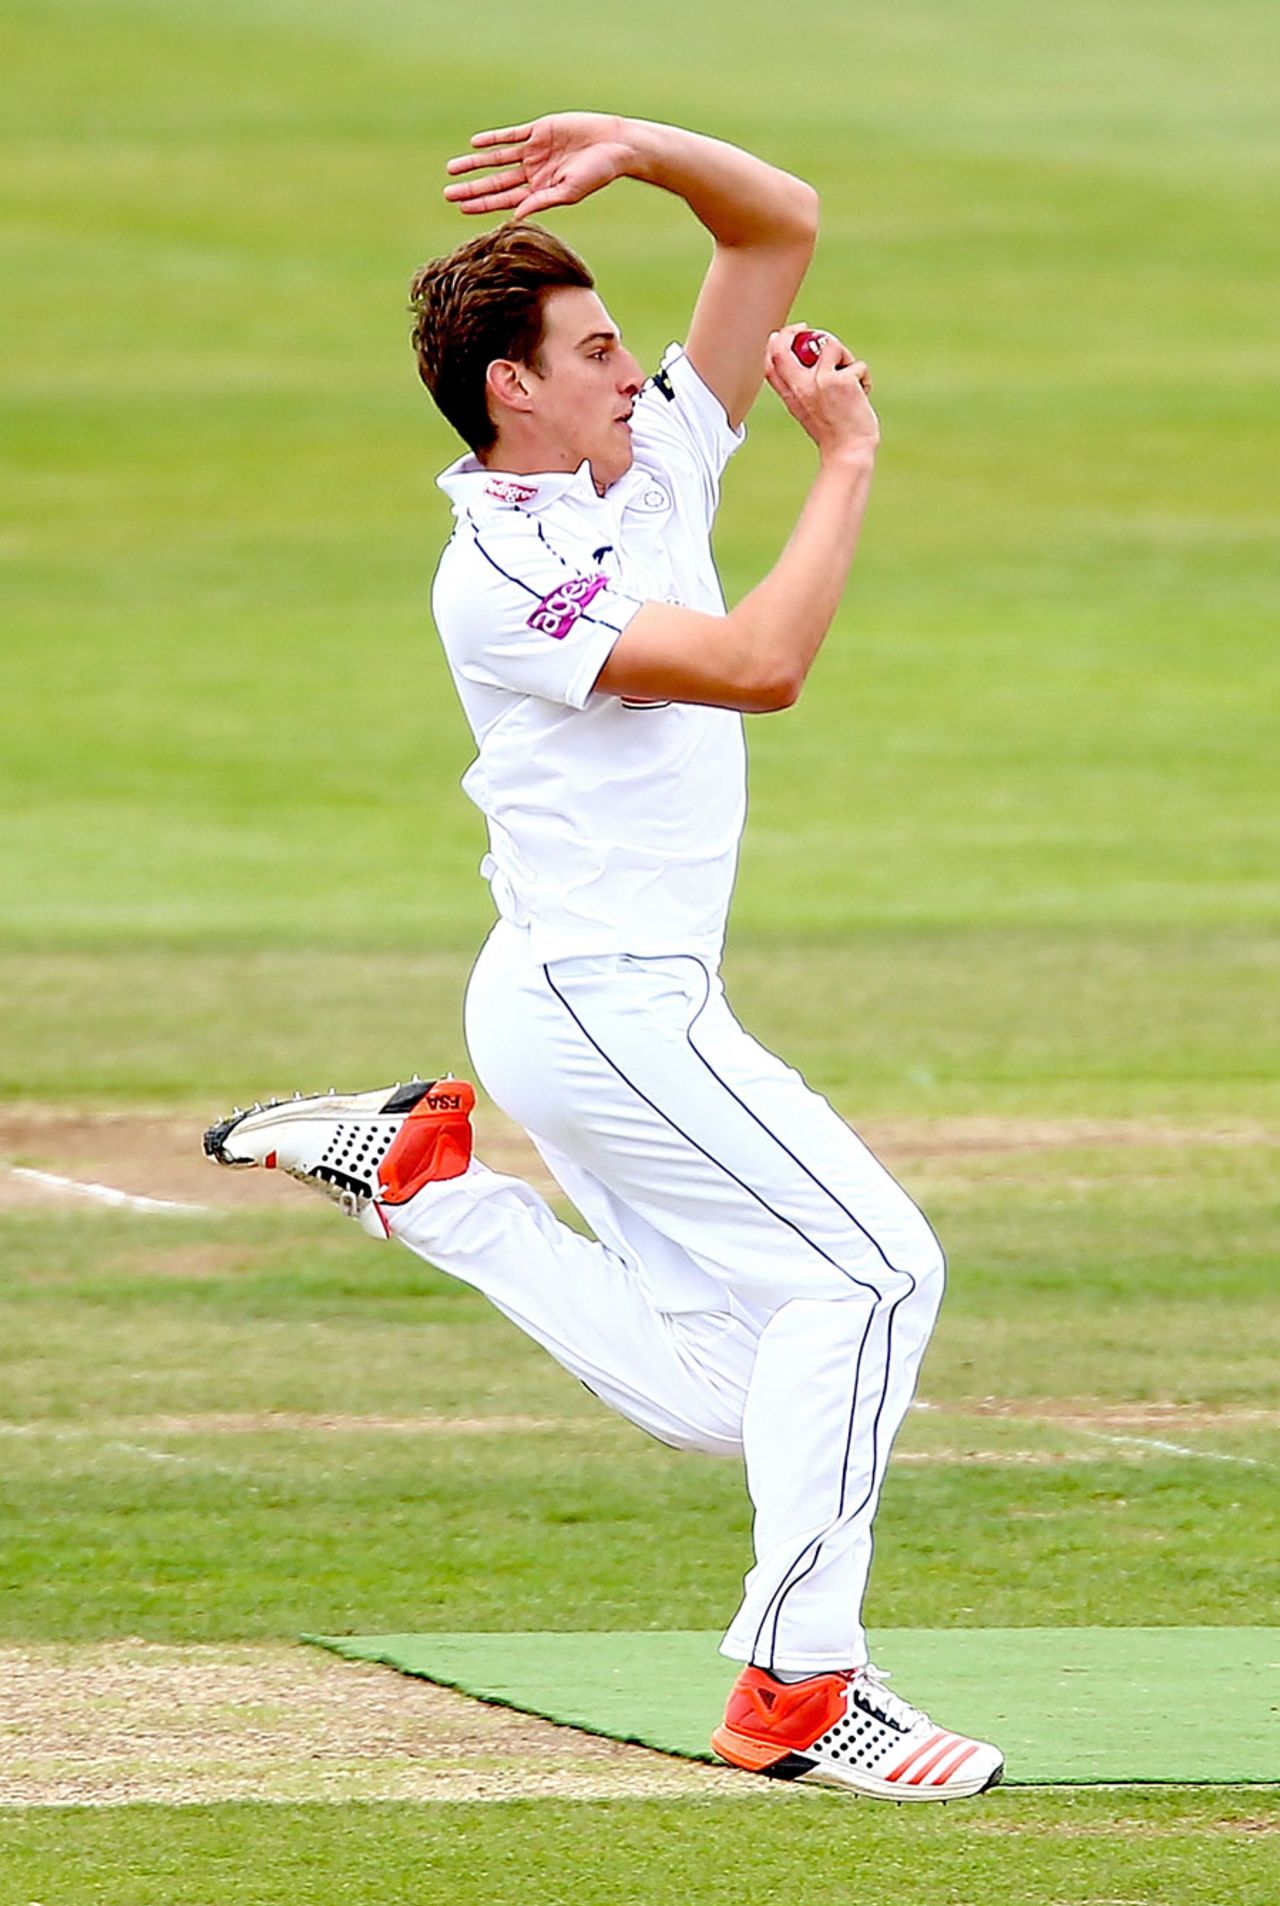 Bradley Wheal was playing in his second first-class match, Hampshire v Worcestershire, County Championship, Division One, Ageas Bowl, 2nd day, June 1, 2015